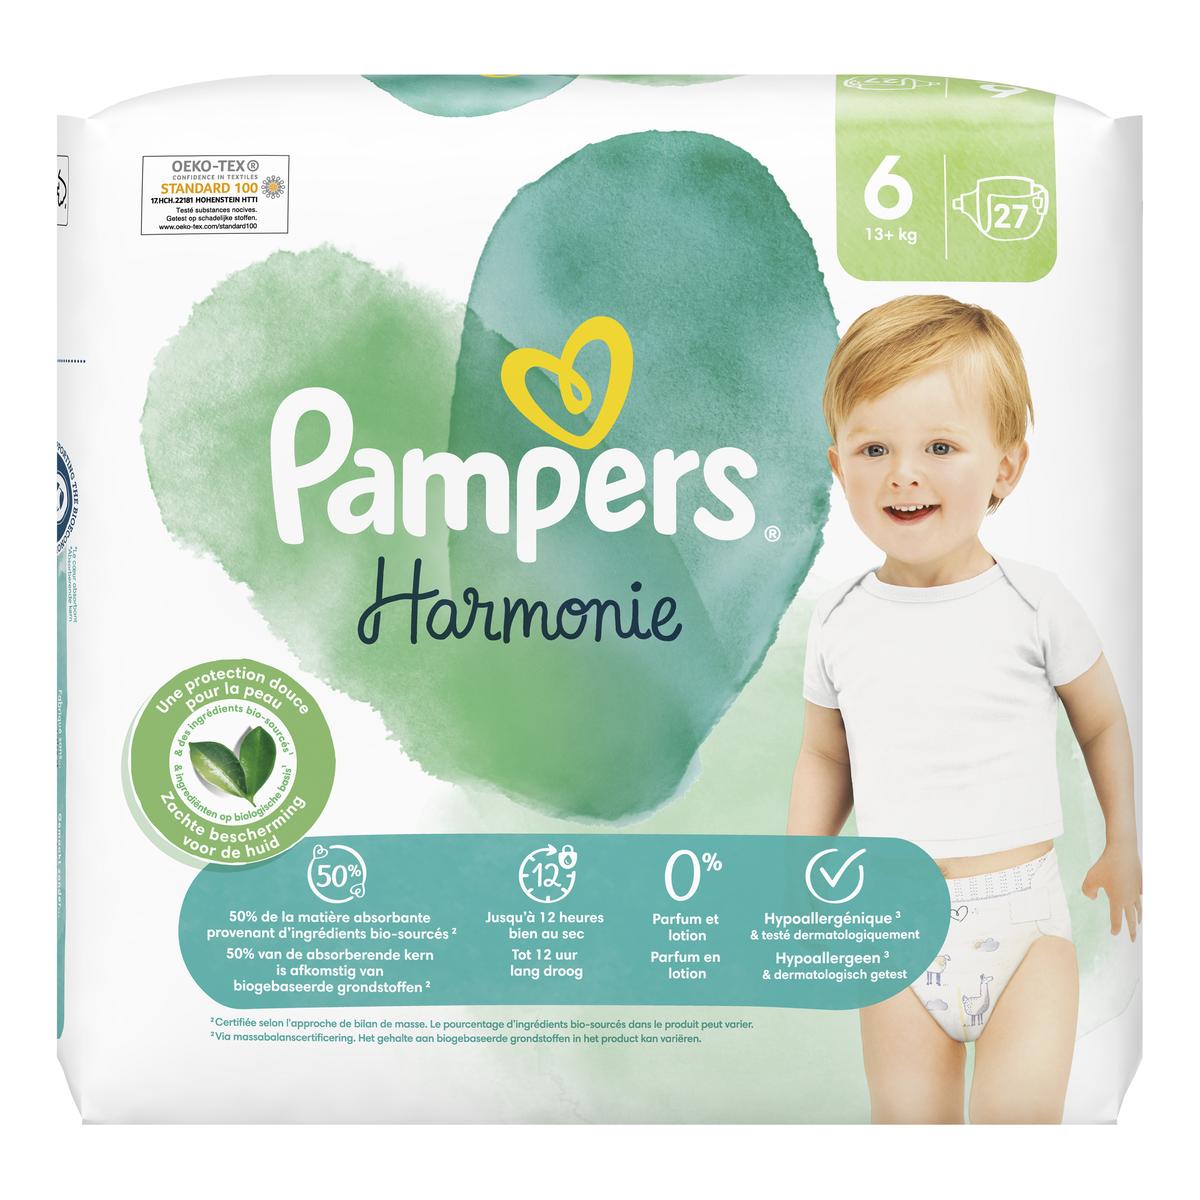 Pampers Harmonie Pants Size 6 couches-culottes